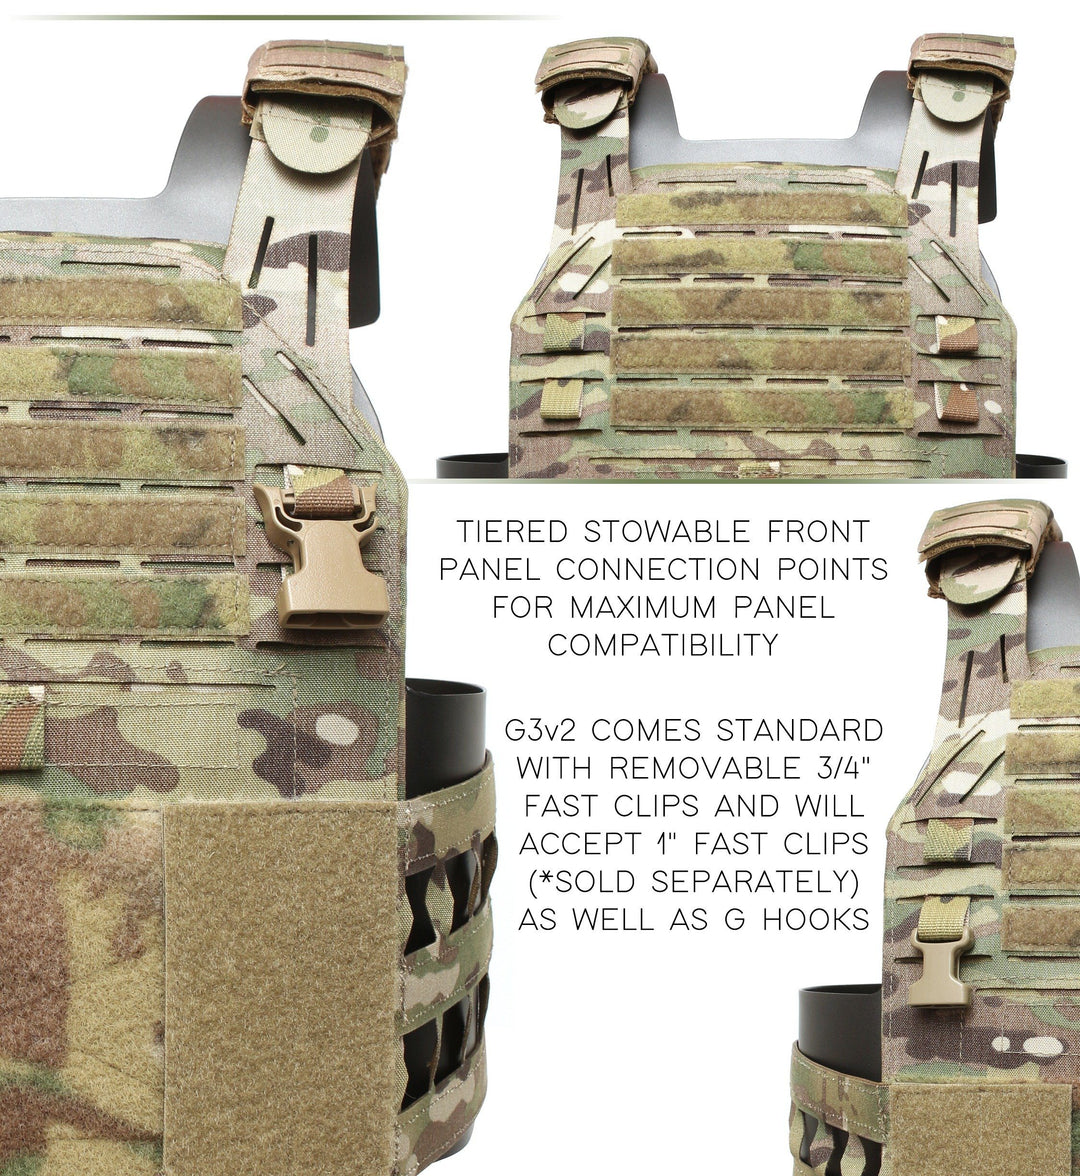 Gear - Rigs - Plate Carriers - London Bridge Trading LBT-6094 G3 Plate Carrier - Coyote Brown